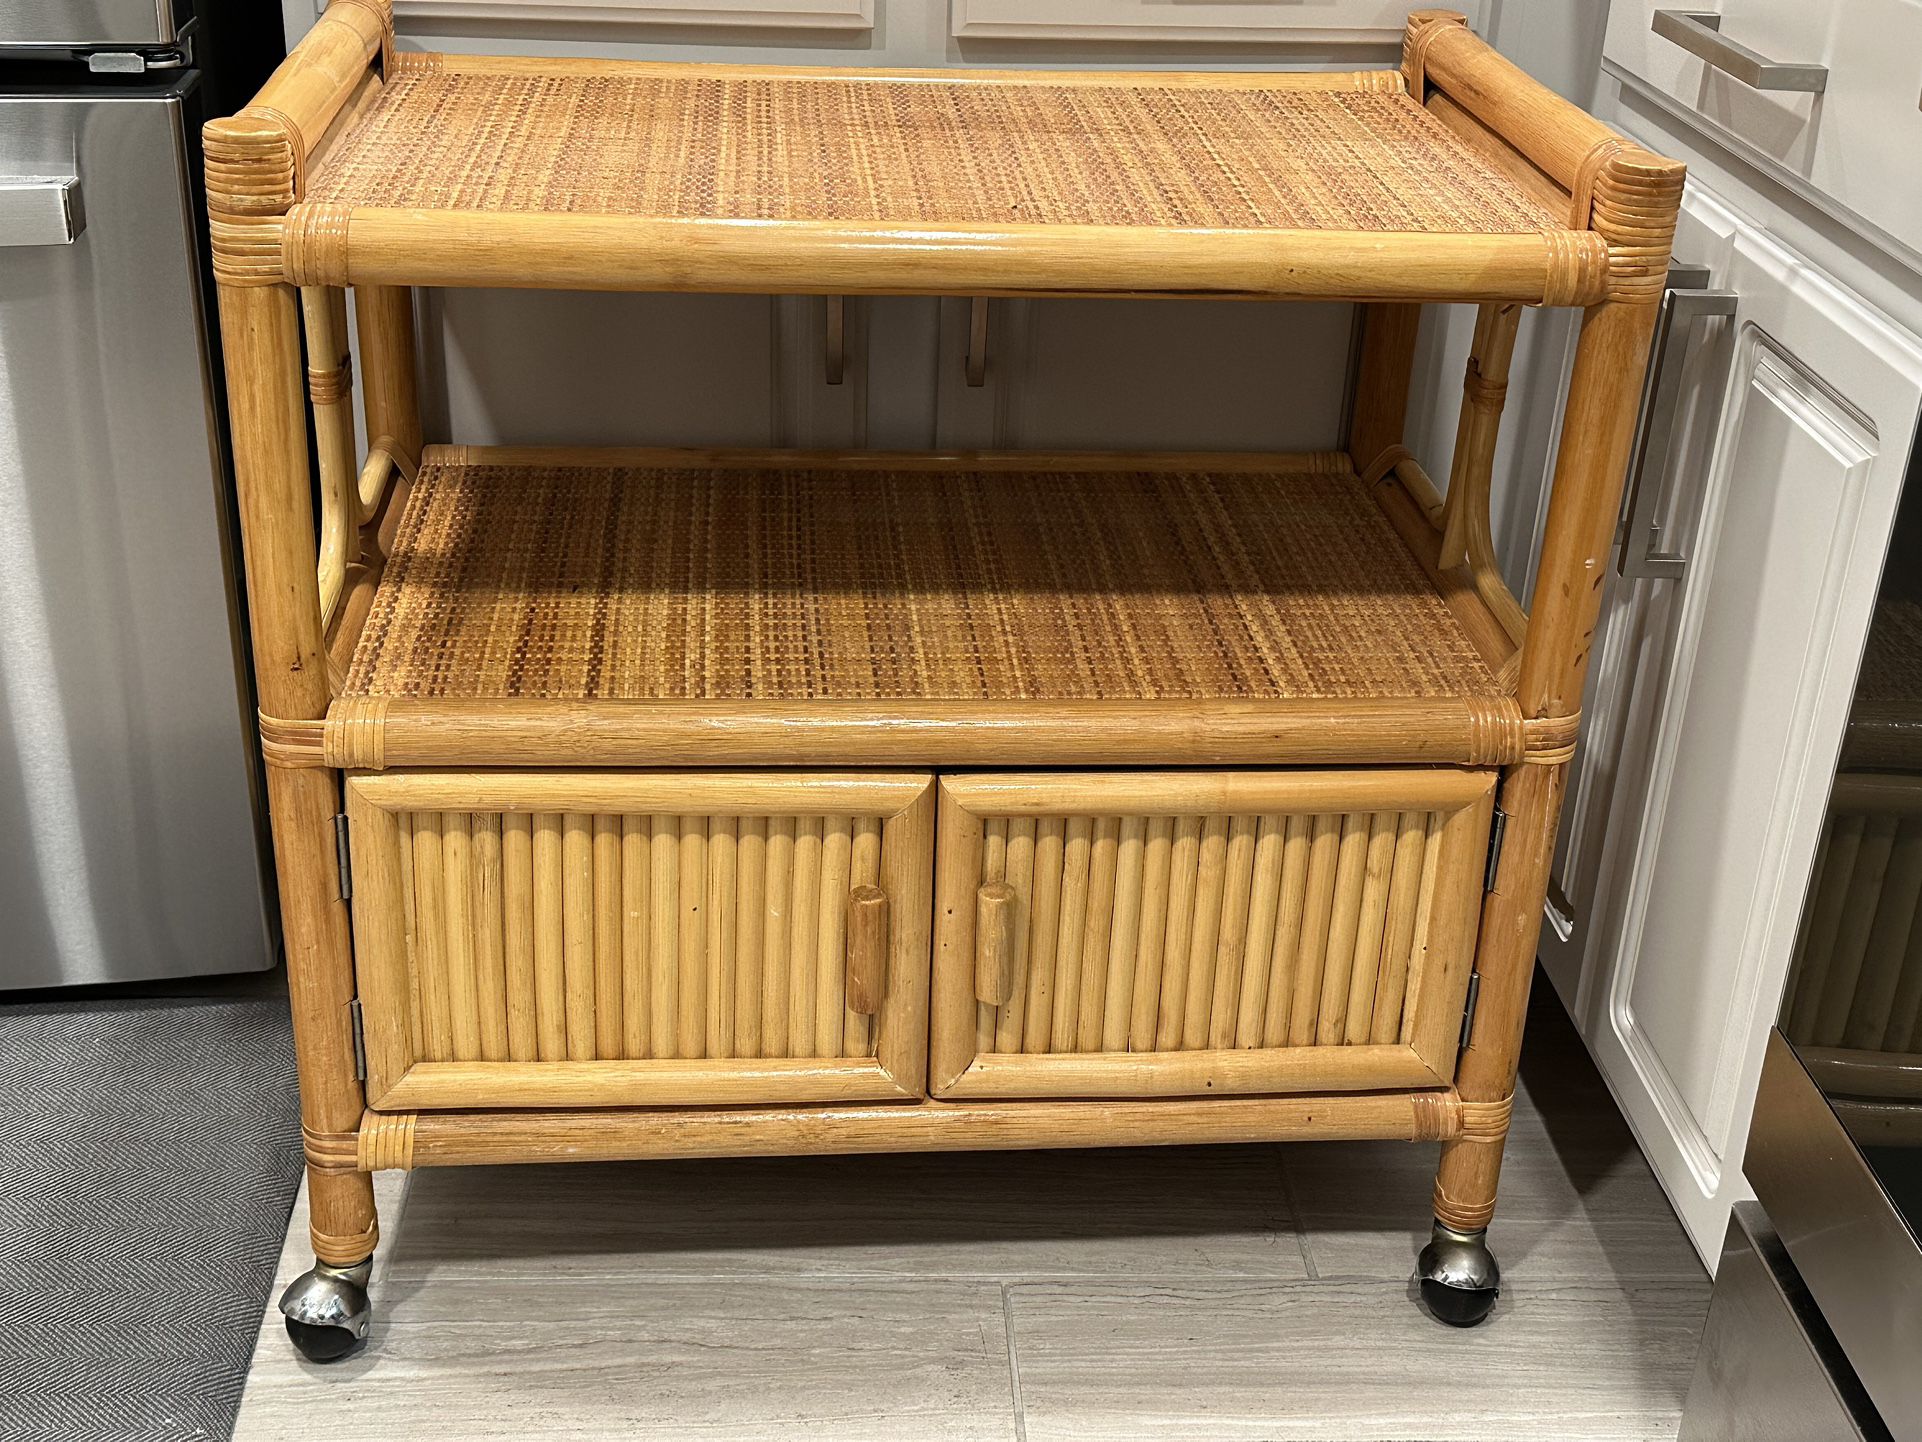 29” Wide Bamboo Bar Cart, Microwave Cart, Utility Cart. Fantastic Condition